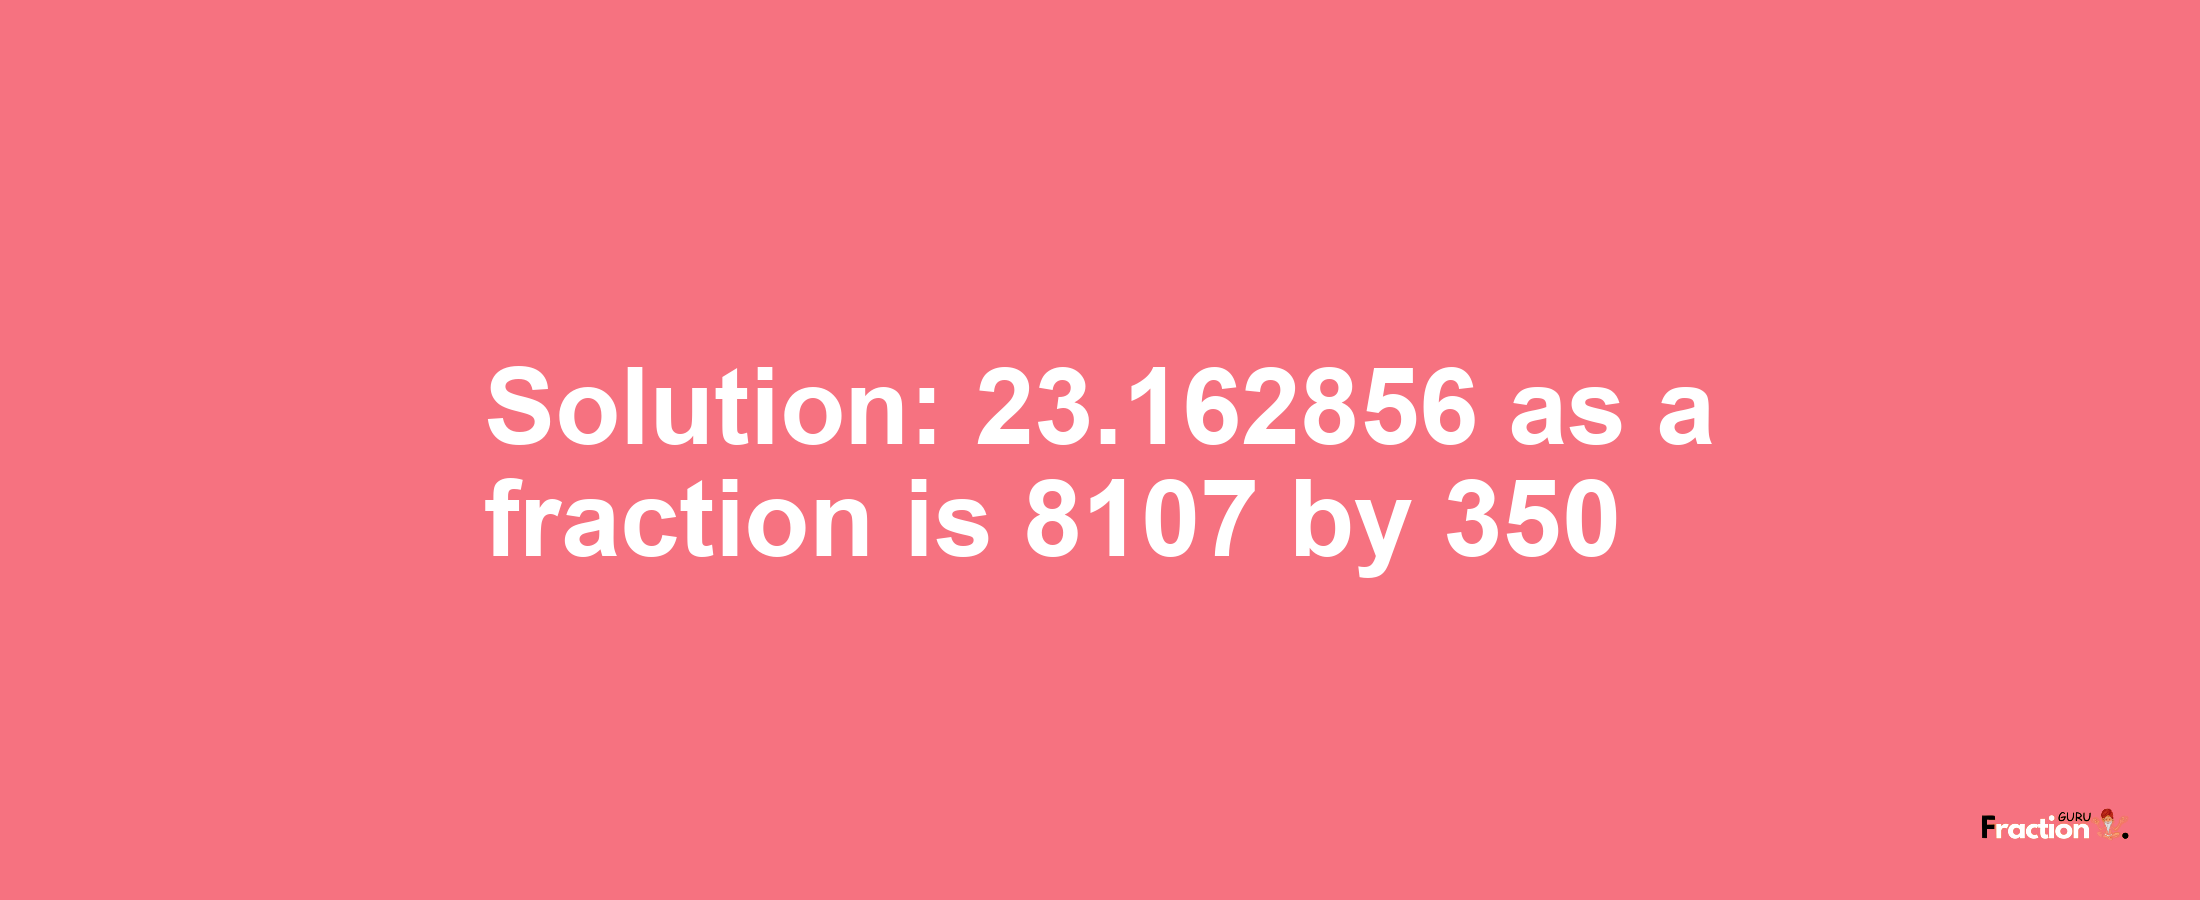 Solution:23.162856 as a fraction is 8107/350